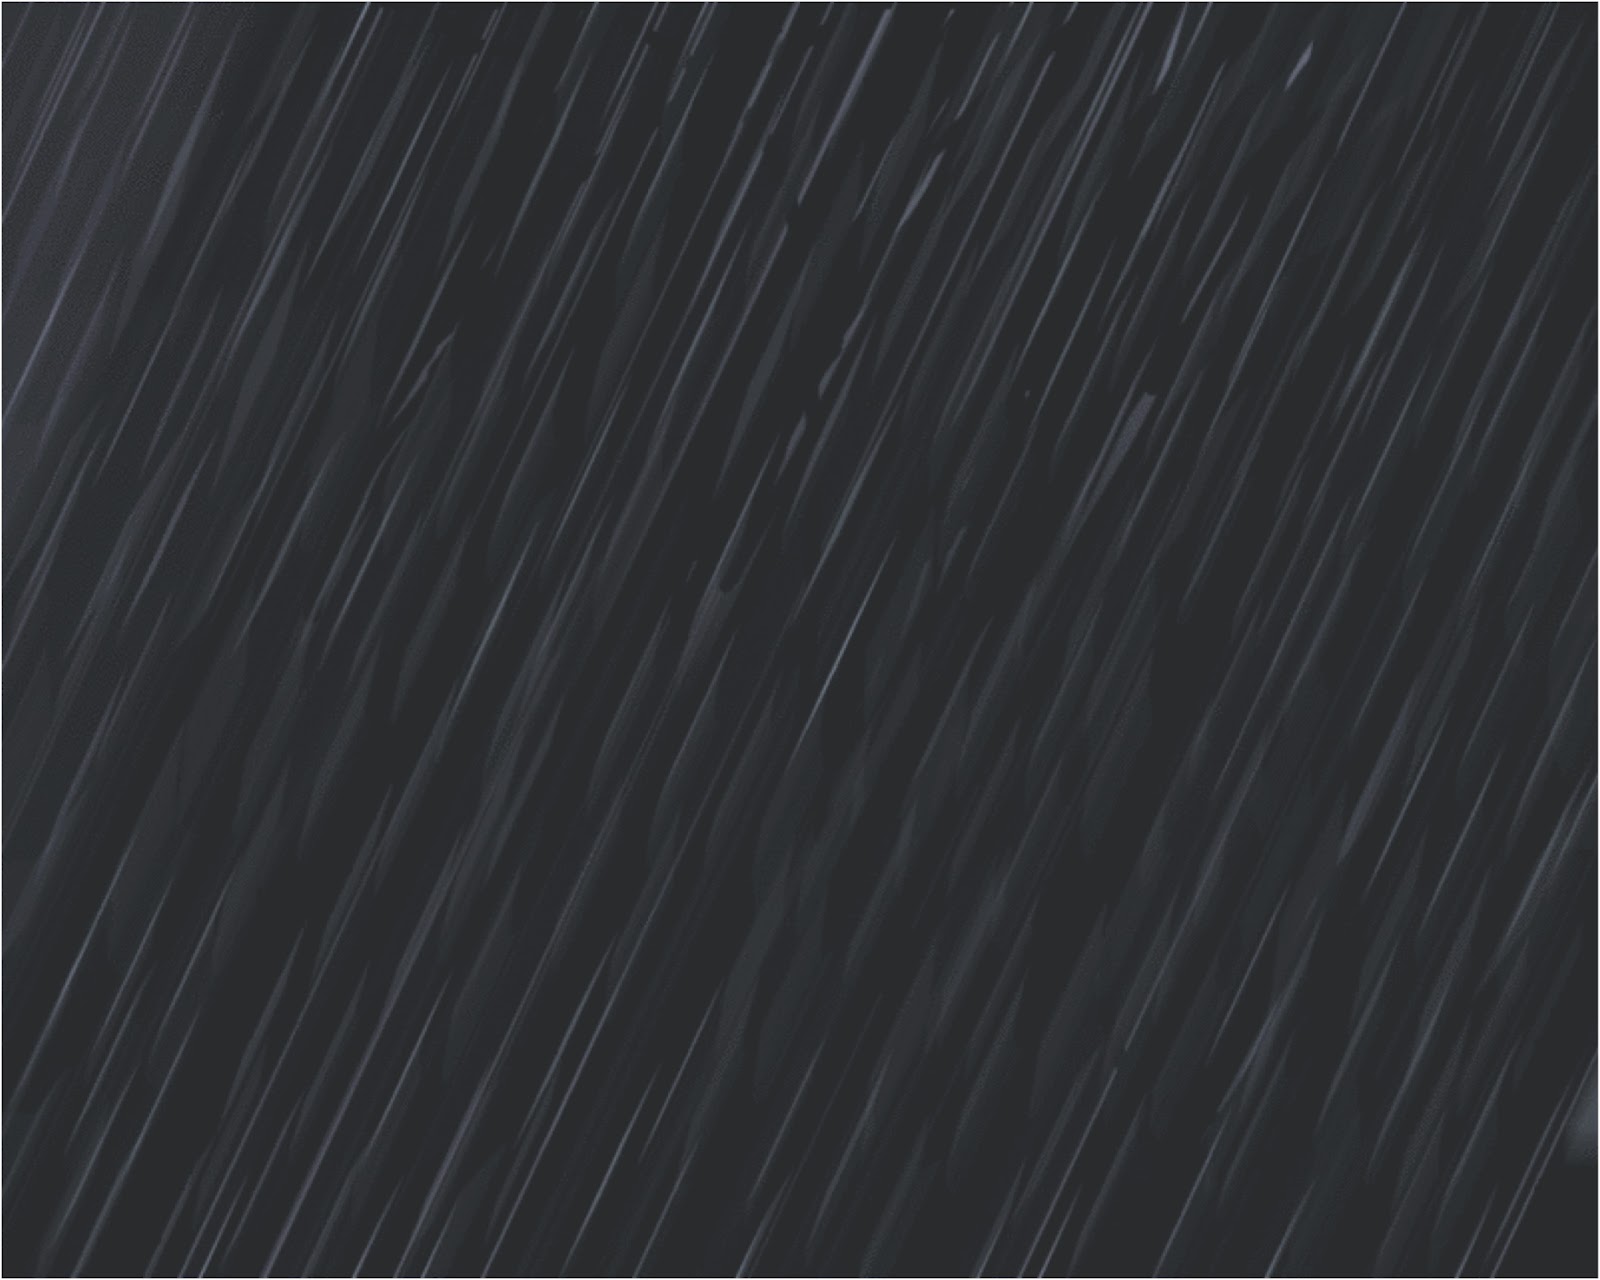 Rain Background And Alternated Different Versions Of The